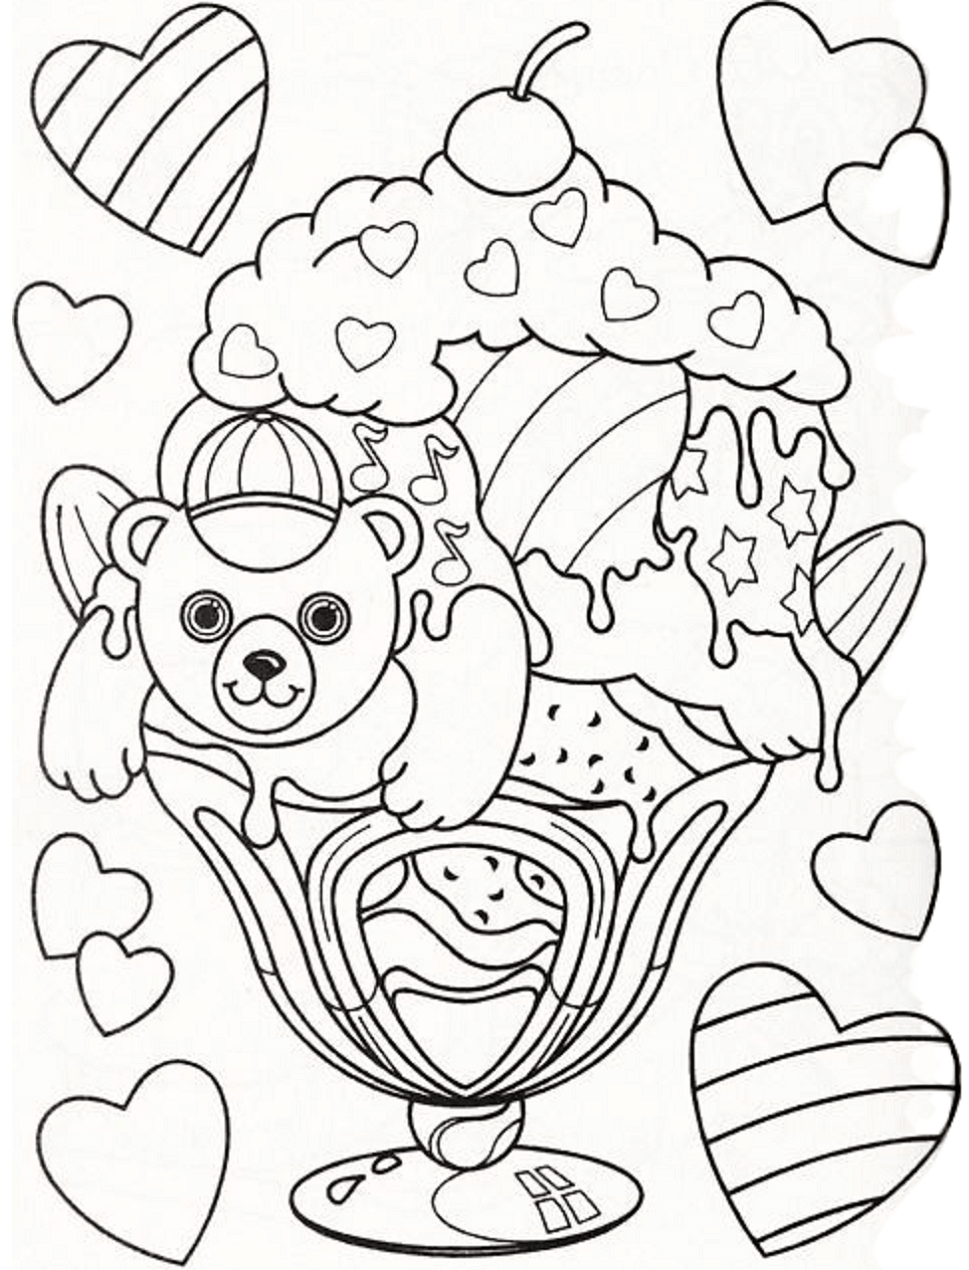 Hollywood Bear Lisa Frank Coloring Page - Free Printable Coloring Pages ...